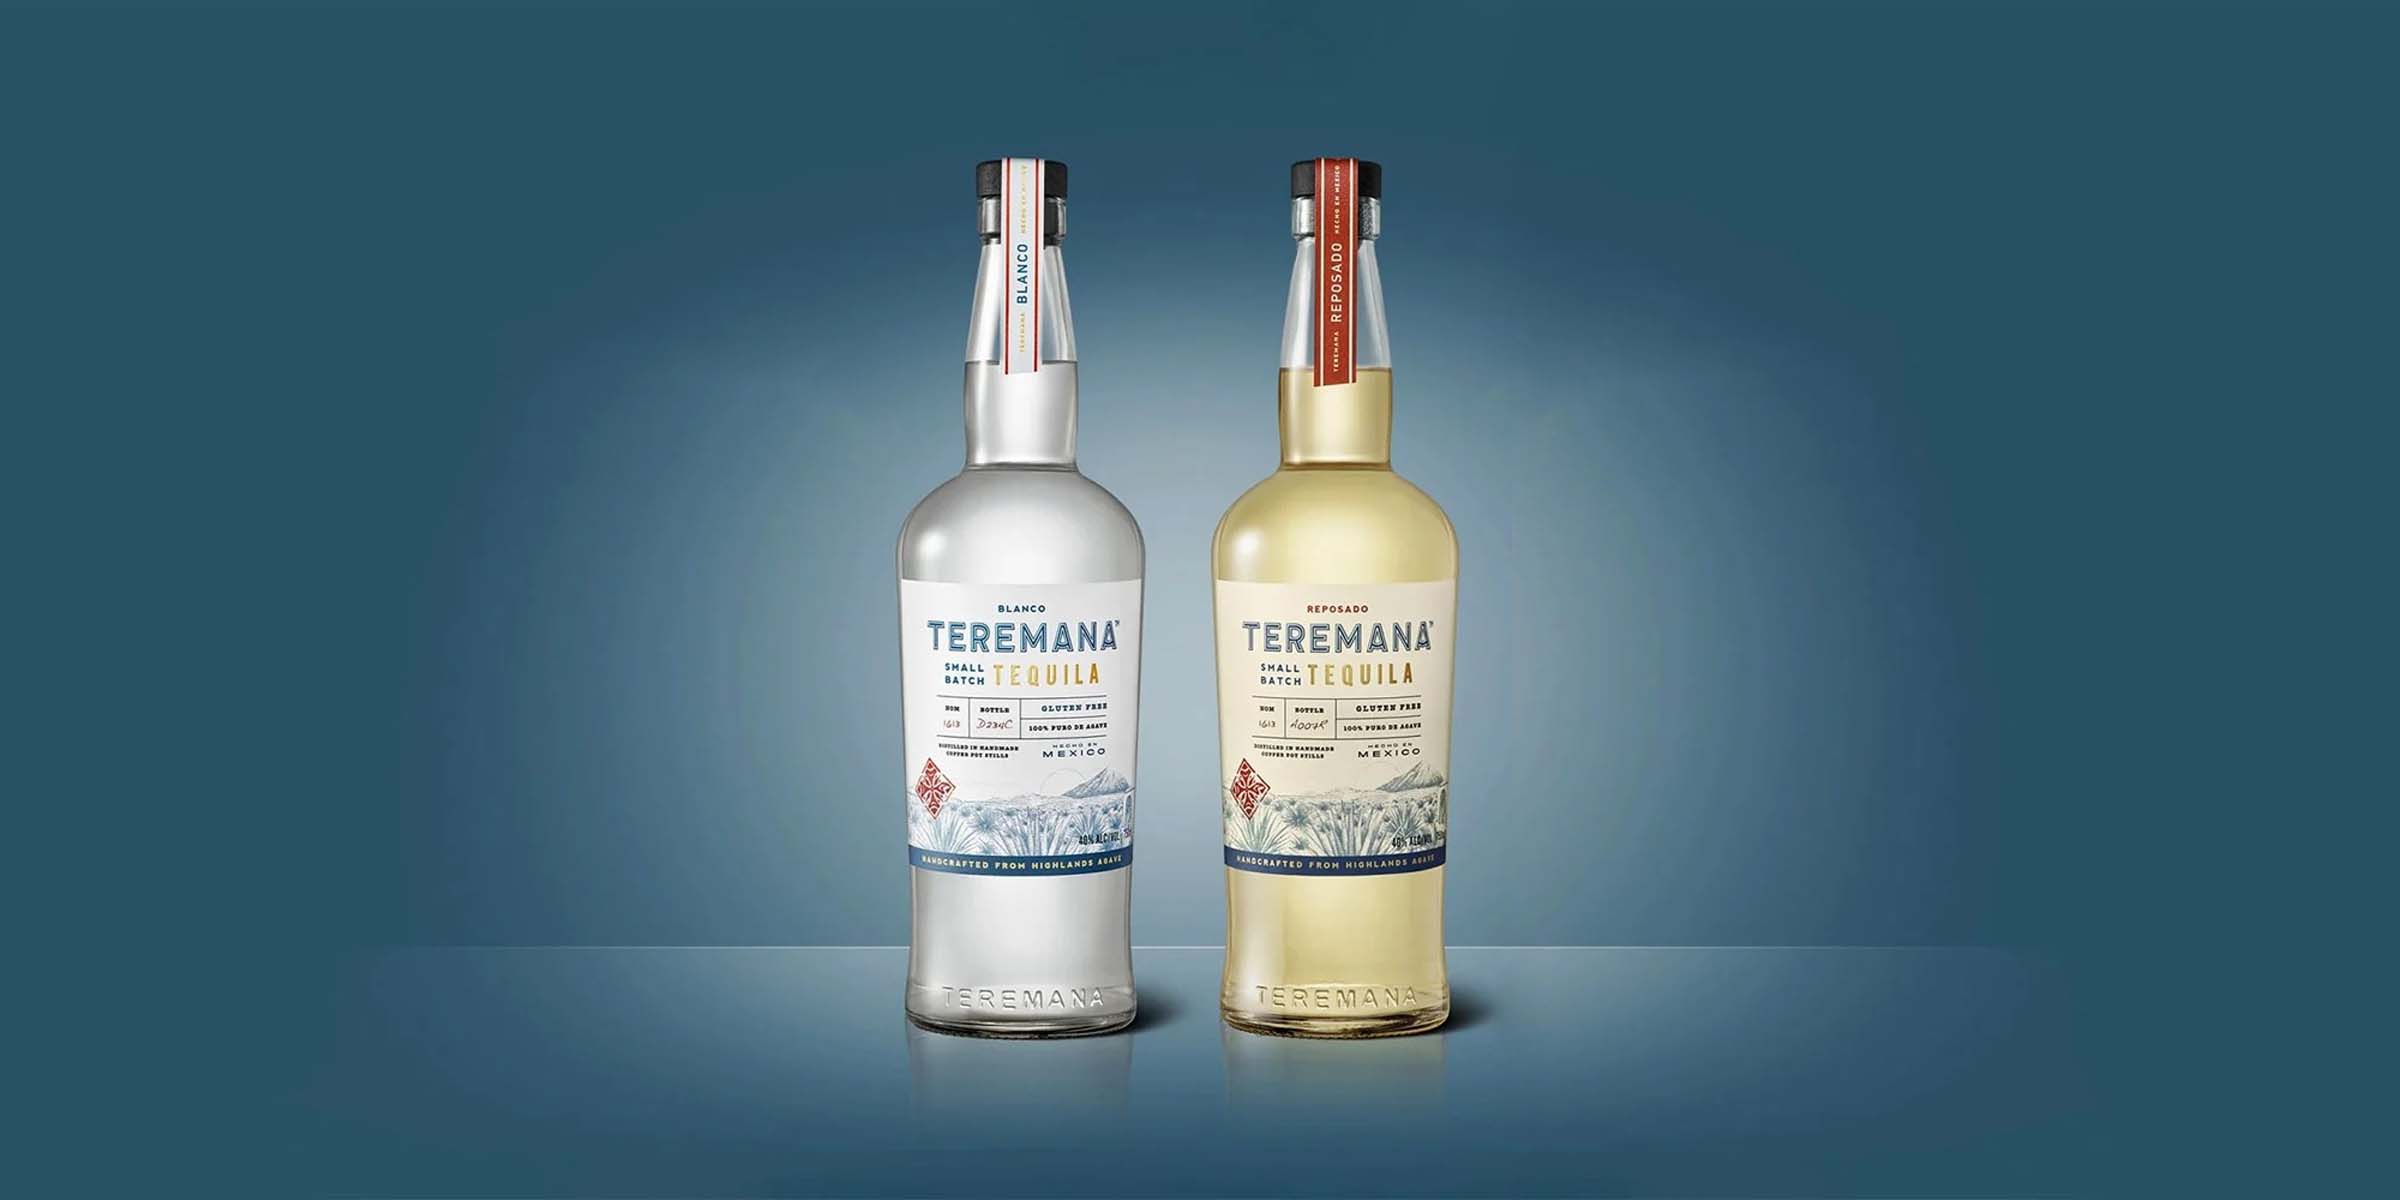 Teremana Tequila: An Incredible Spirit In Every Sense Of The Word